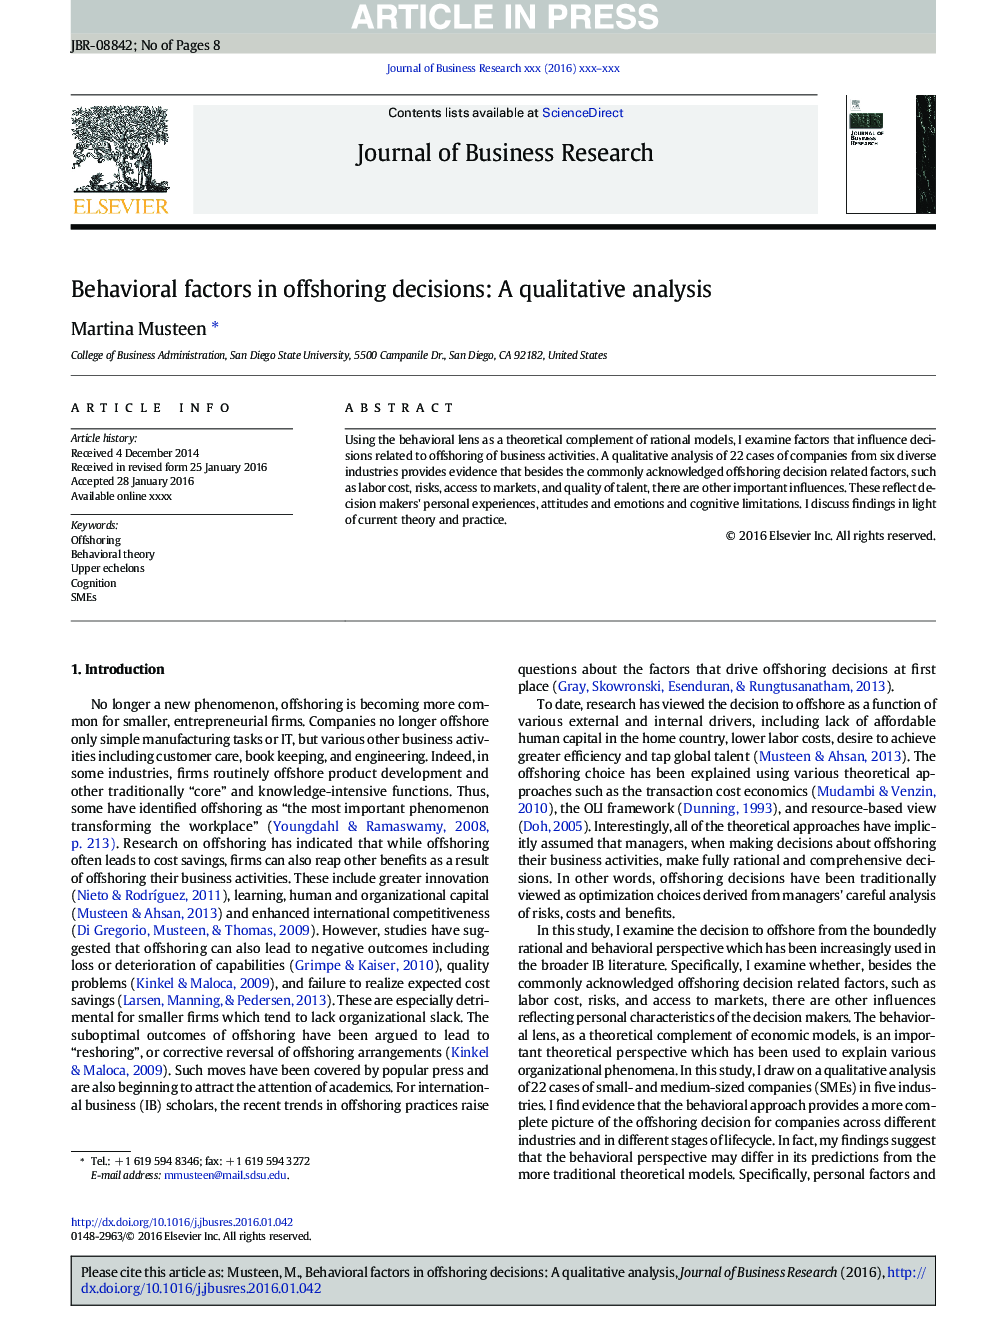 Behavioral factors in offshoring decisions: A qualitative analysis